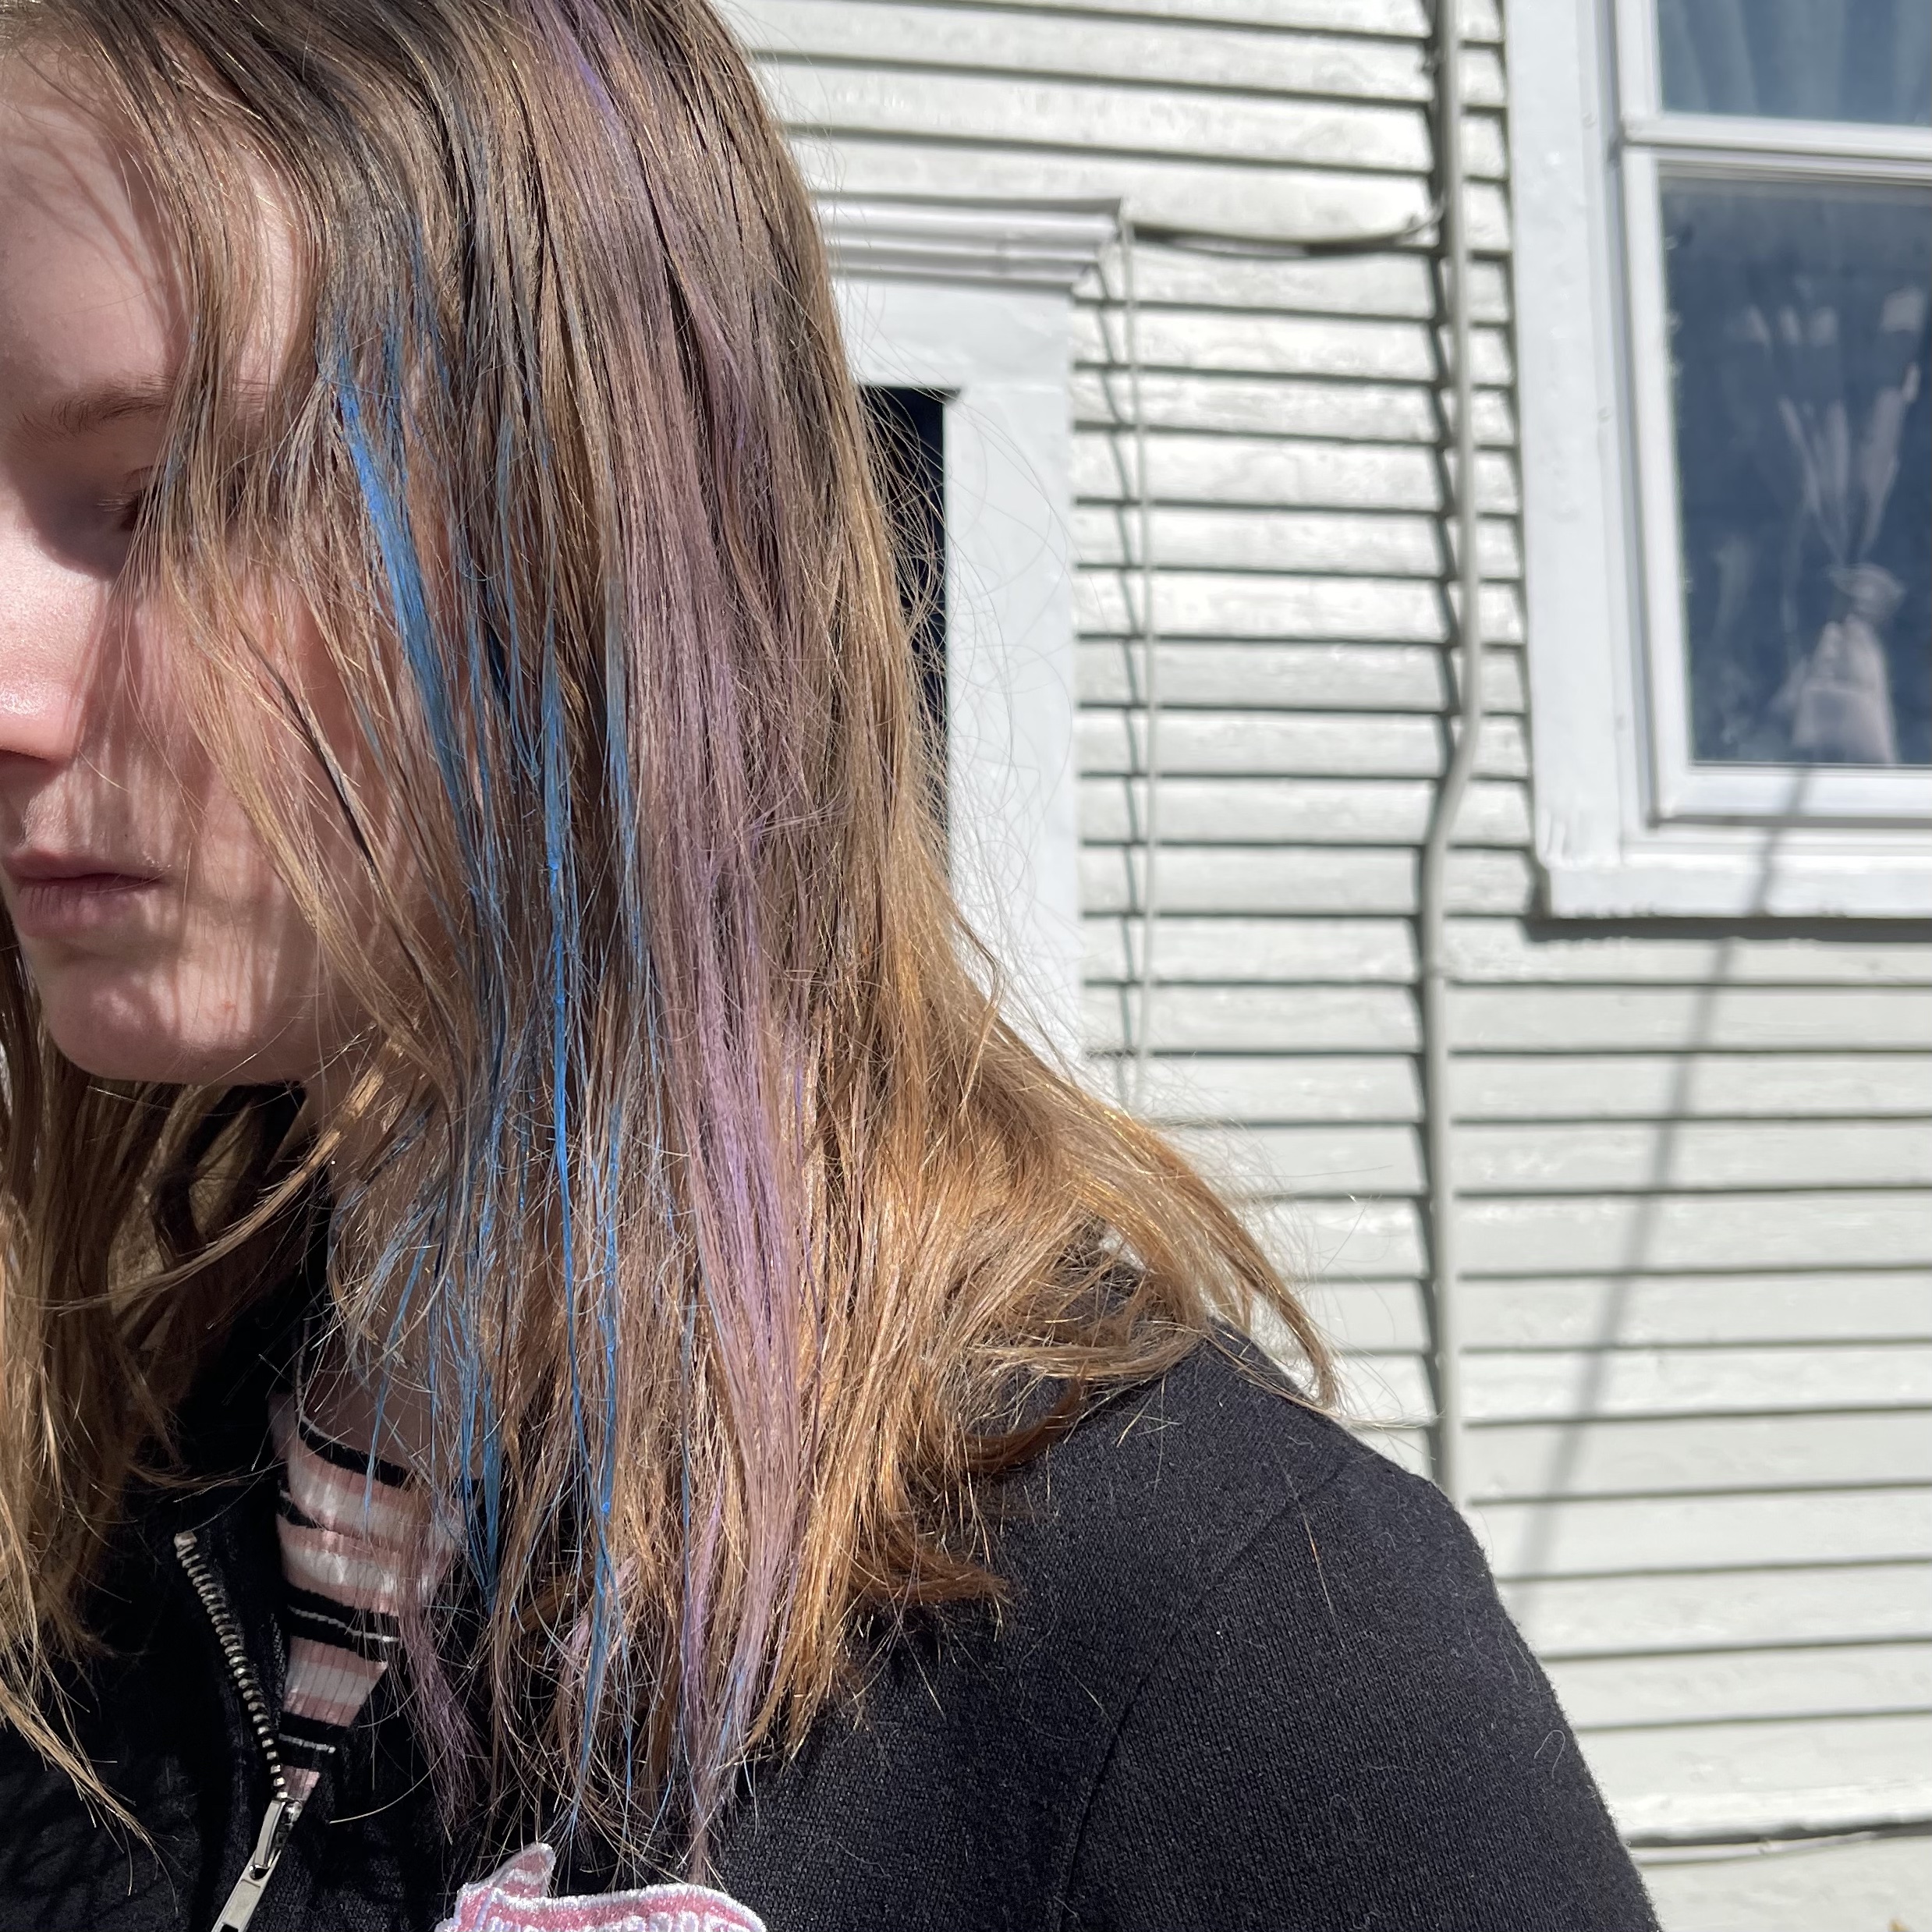 What is Hair Chalk and How to Use It in Kids Hair